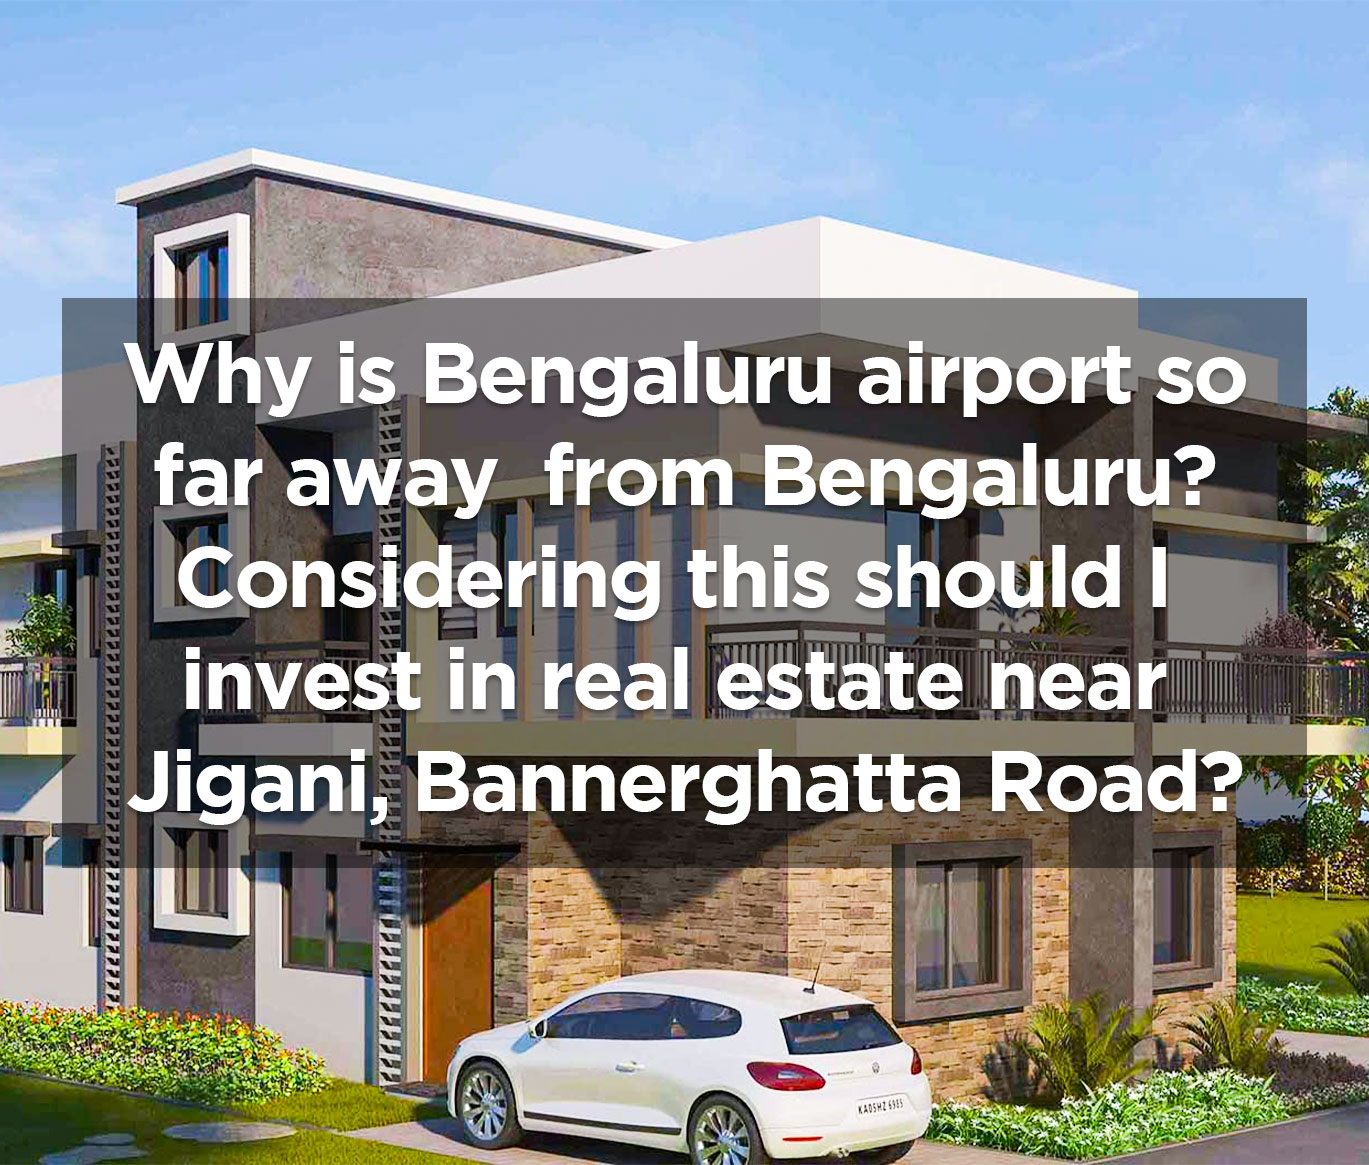 Why is Bengaluru airport so far away from Bengaluru? Considering this should I invest in real estate near Jigani, Bannerghatta Road?